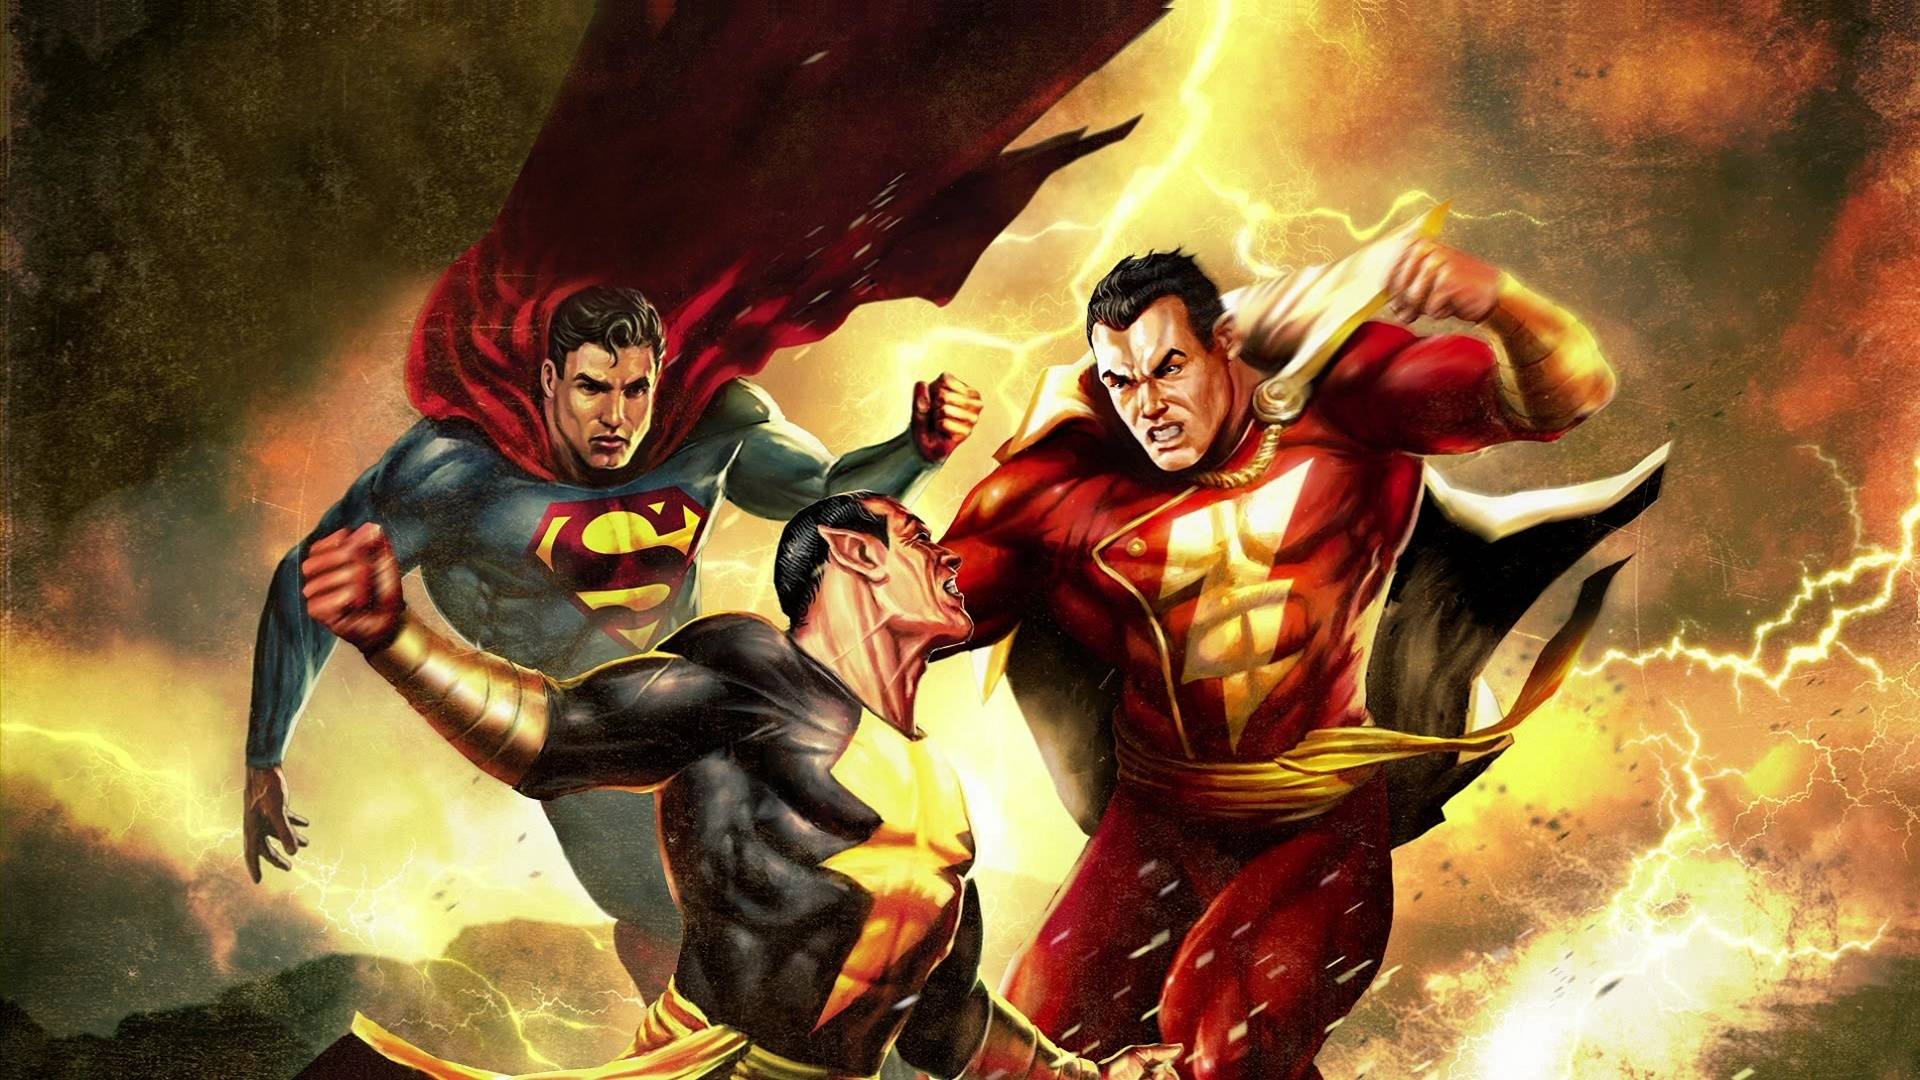 DC Has Released The Official Synopsis For SHAZAM! And It's Perfect